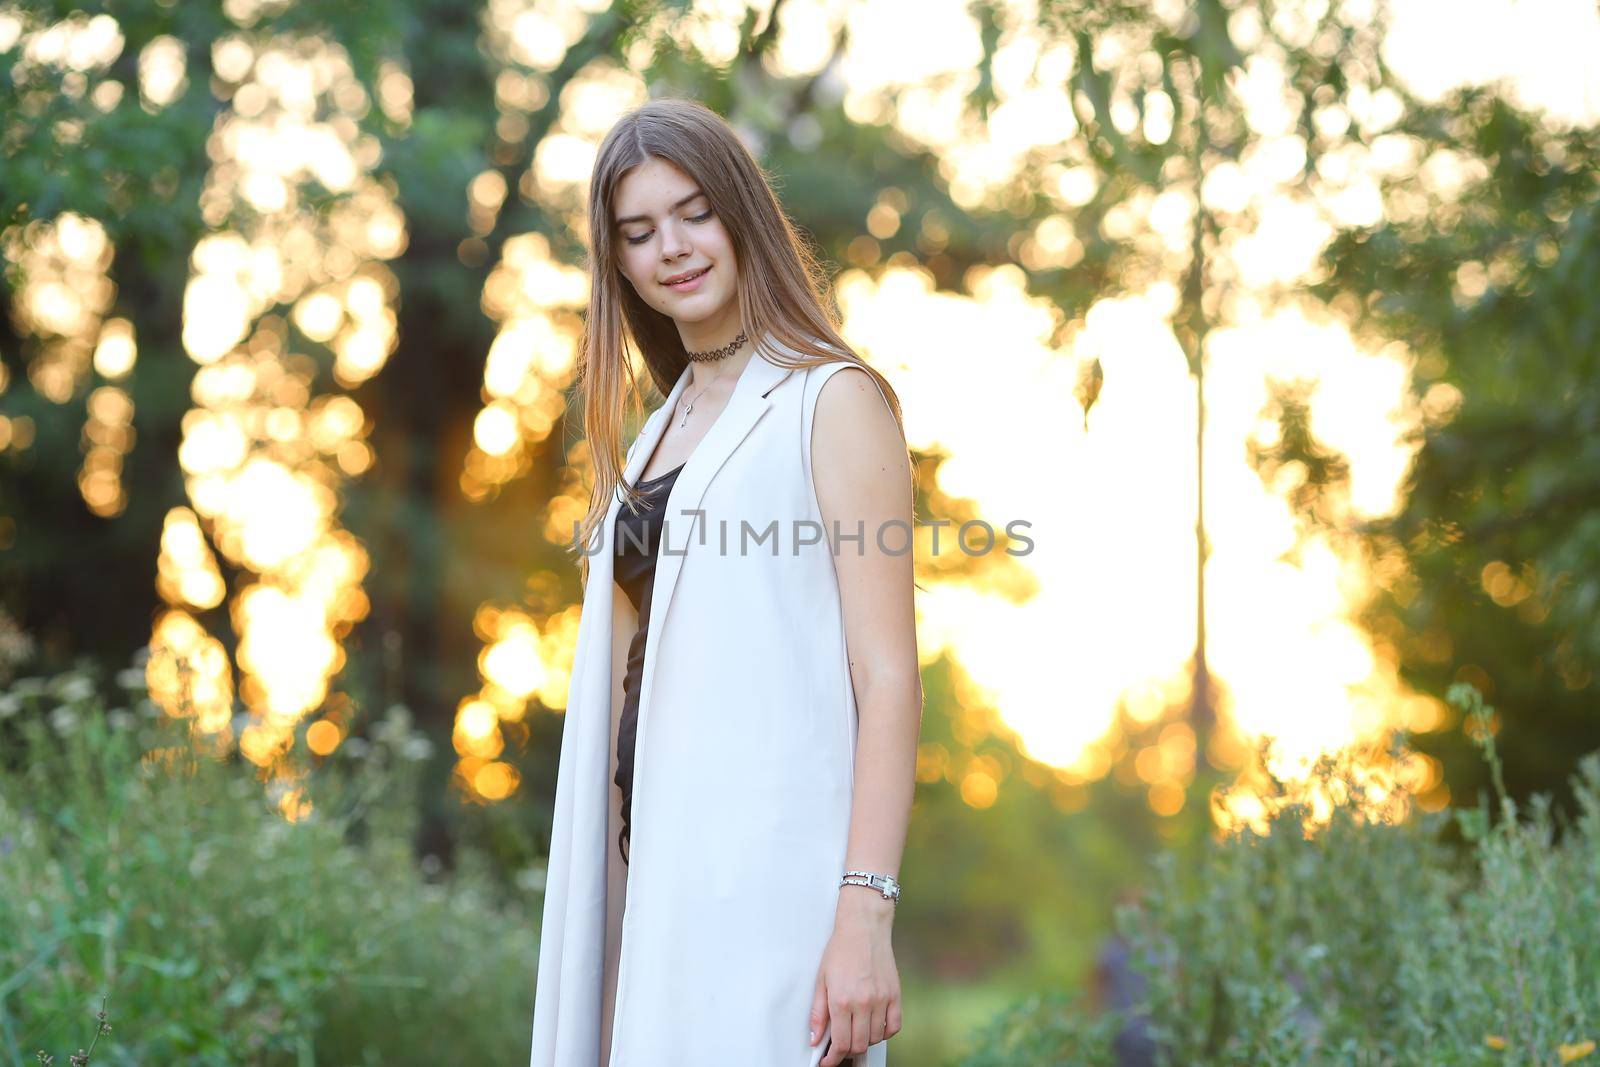 Woman with long hair and beautiful eyes on a green background shows the different human emotions. Lady portrays joy, lightness, ease, delight